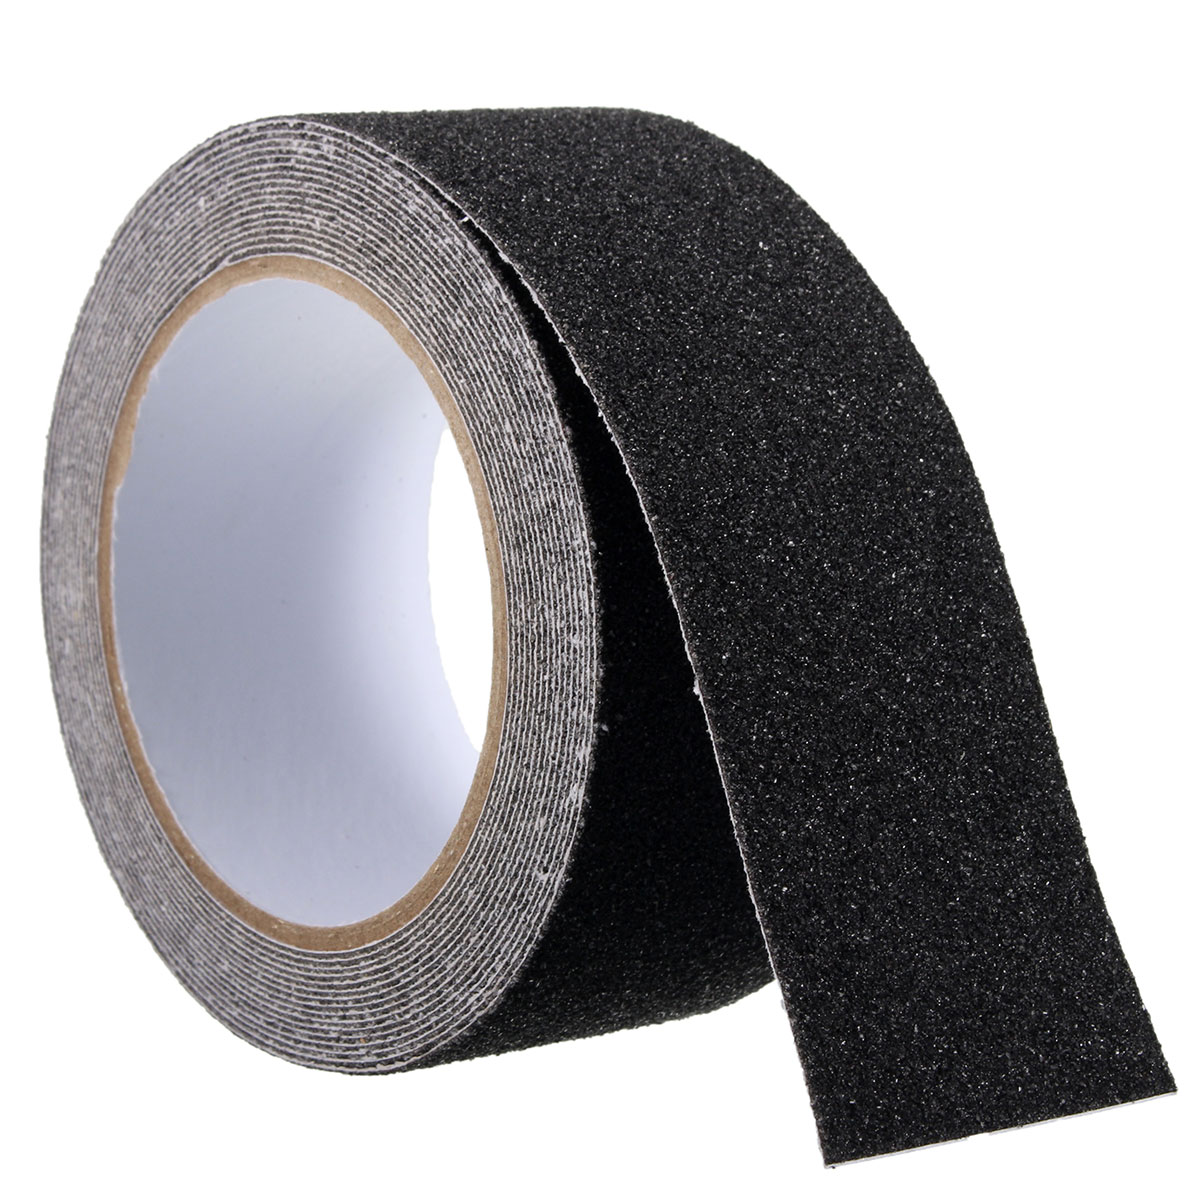 5CM-x-5M-Non-Slip-In-The-Dark-Tape-Anti-Slip-Adhesive-Grip-for-Stairs-and-Gaffers-165-Feet-Long-1382967-7